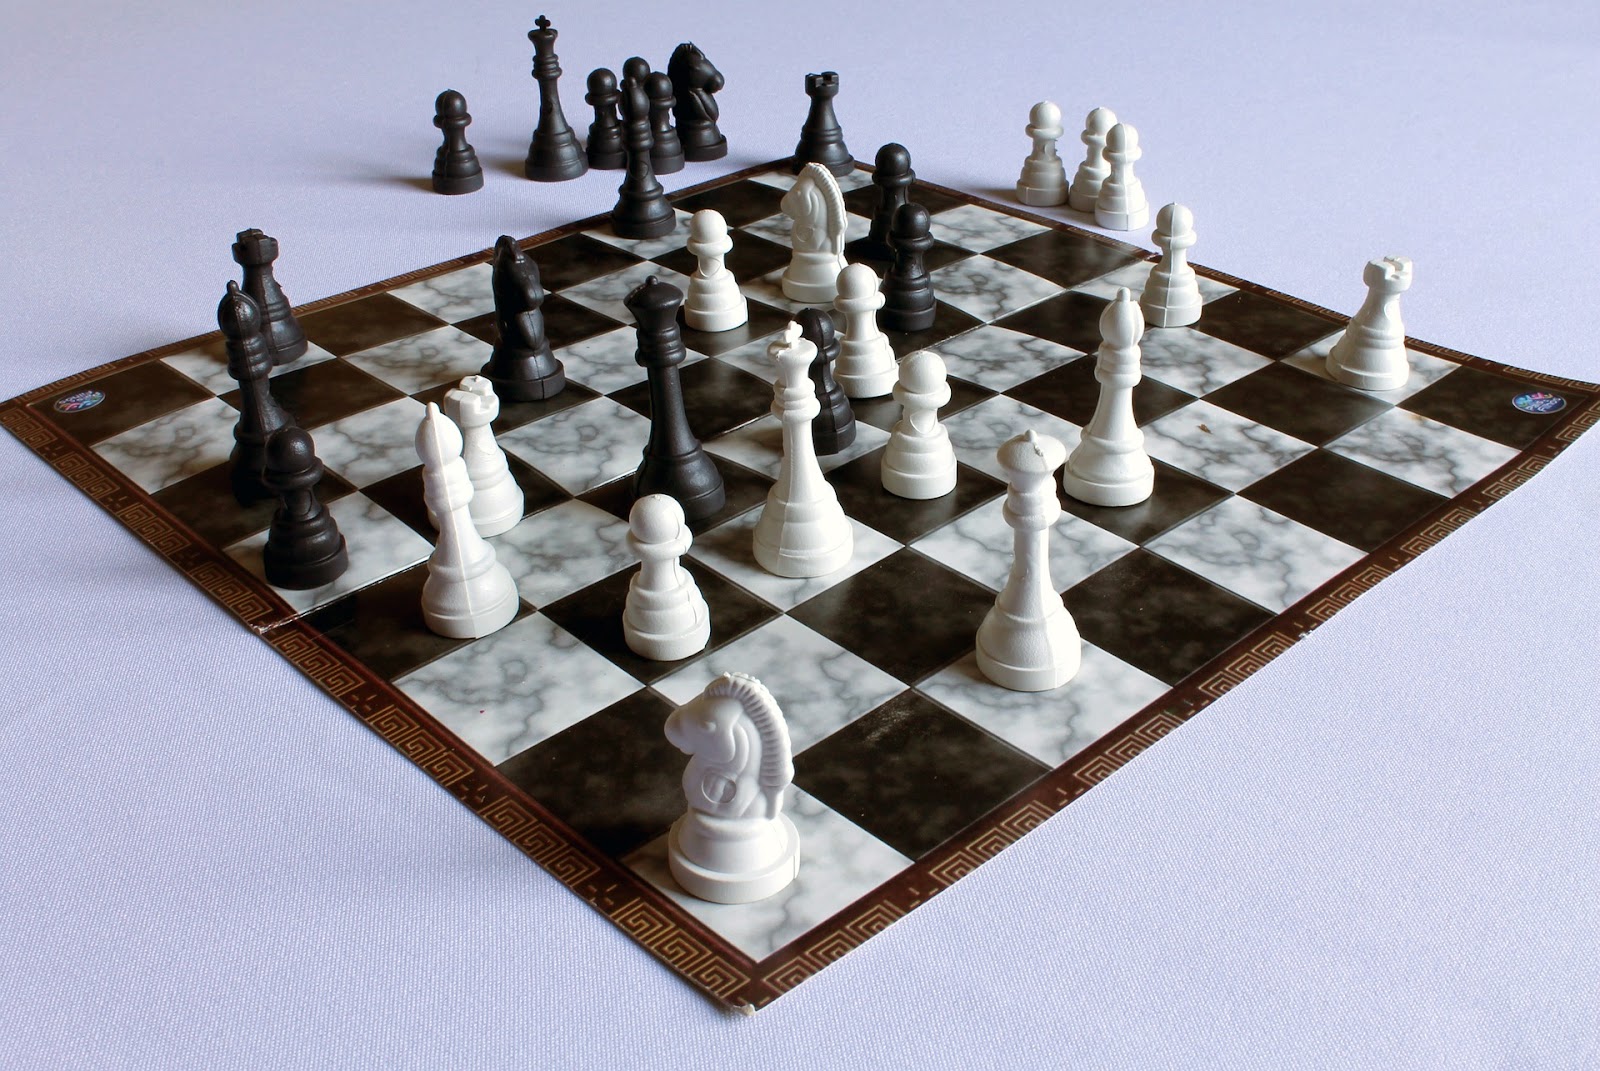 Chess Strategy for Beginners: Complete Guide